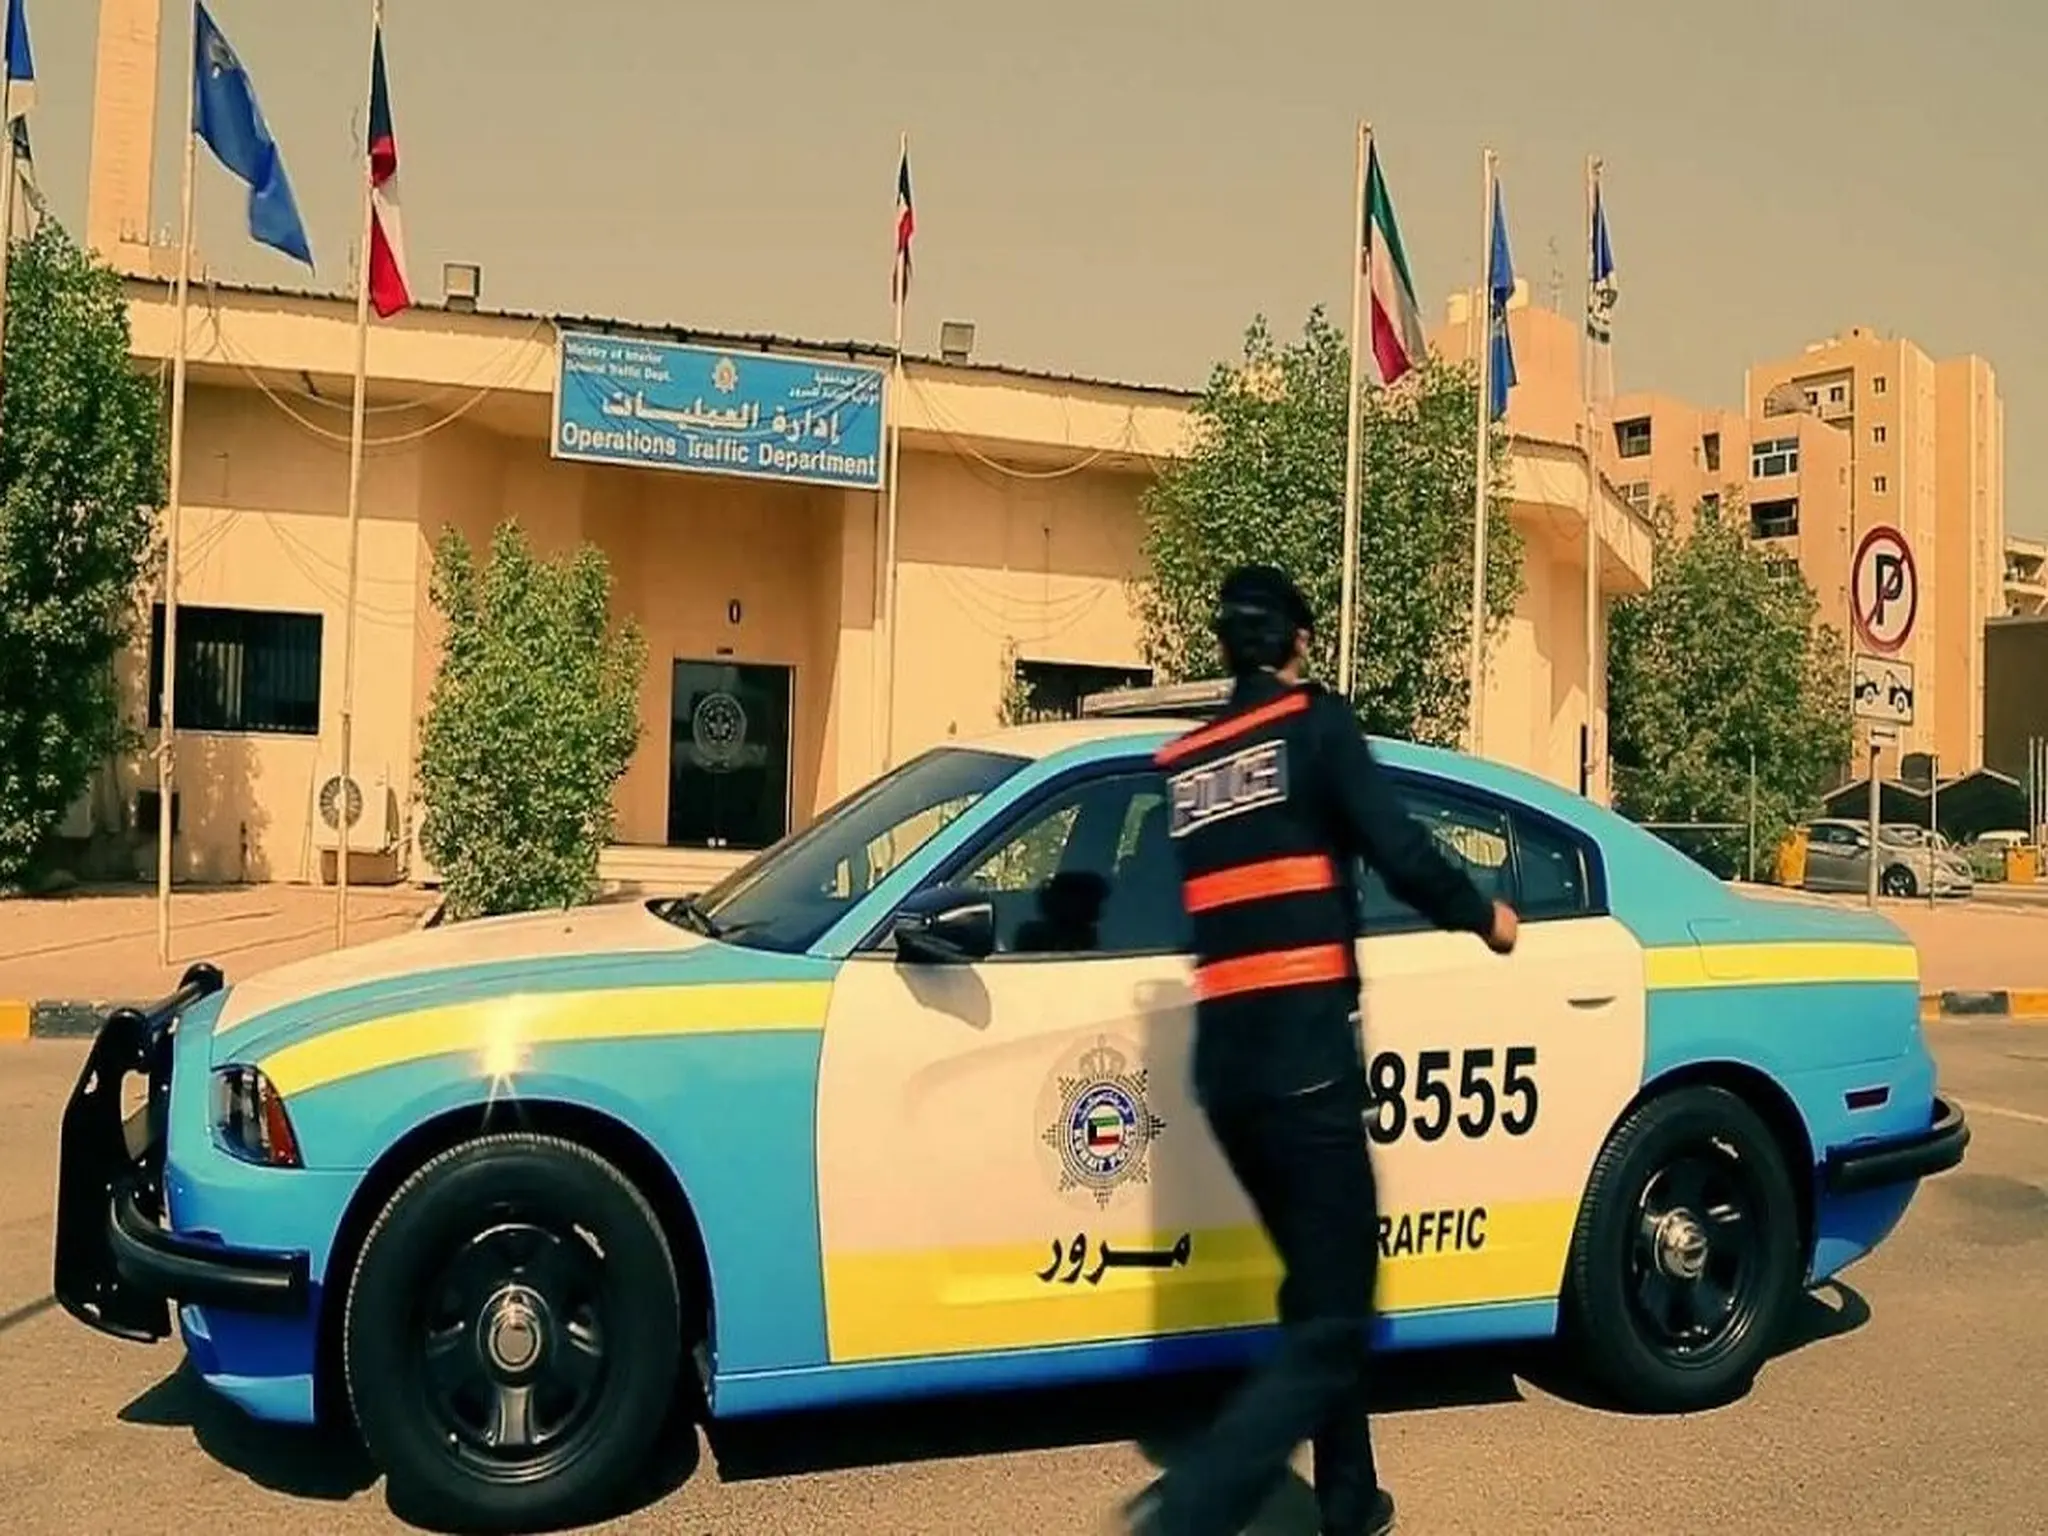 A man and a woman slapped a policeman in Kuwait, beat him, and blocked traffic